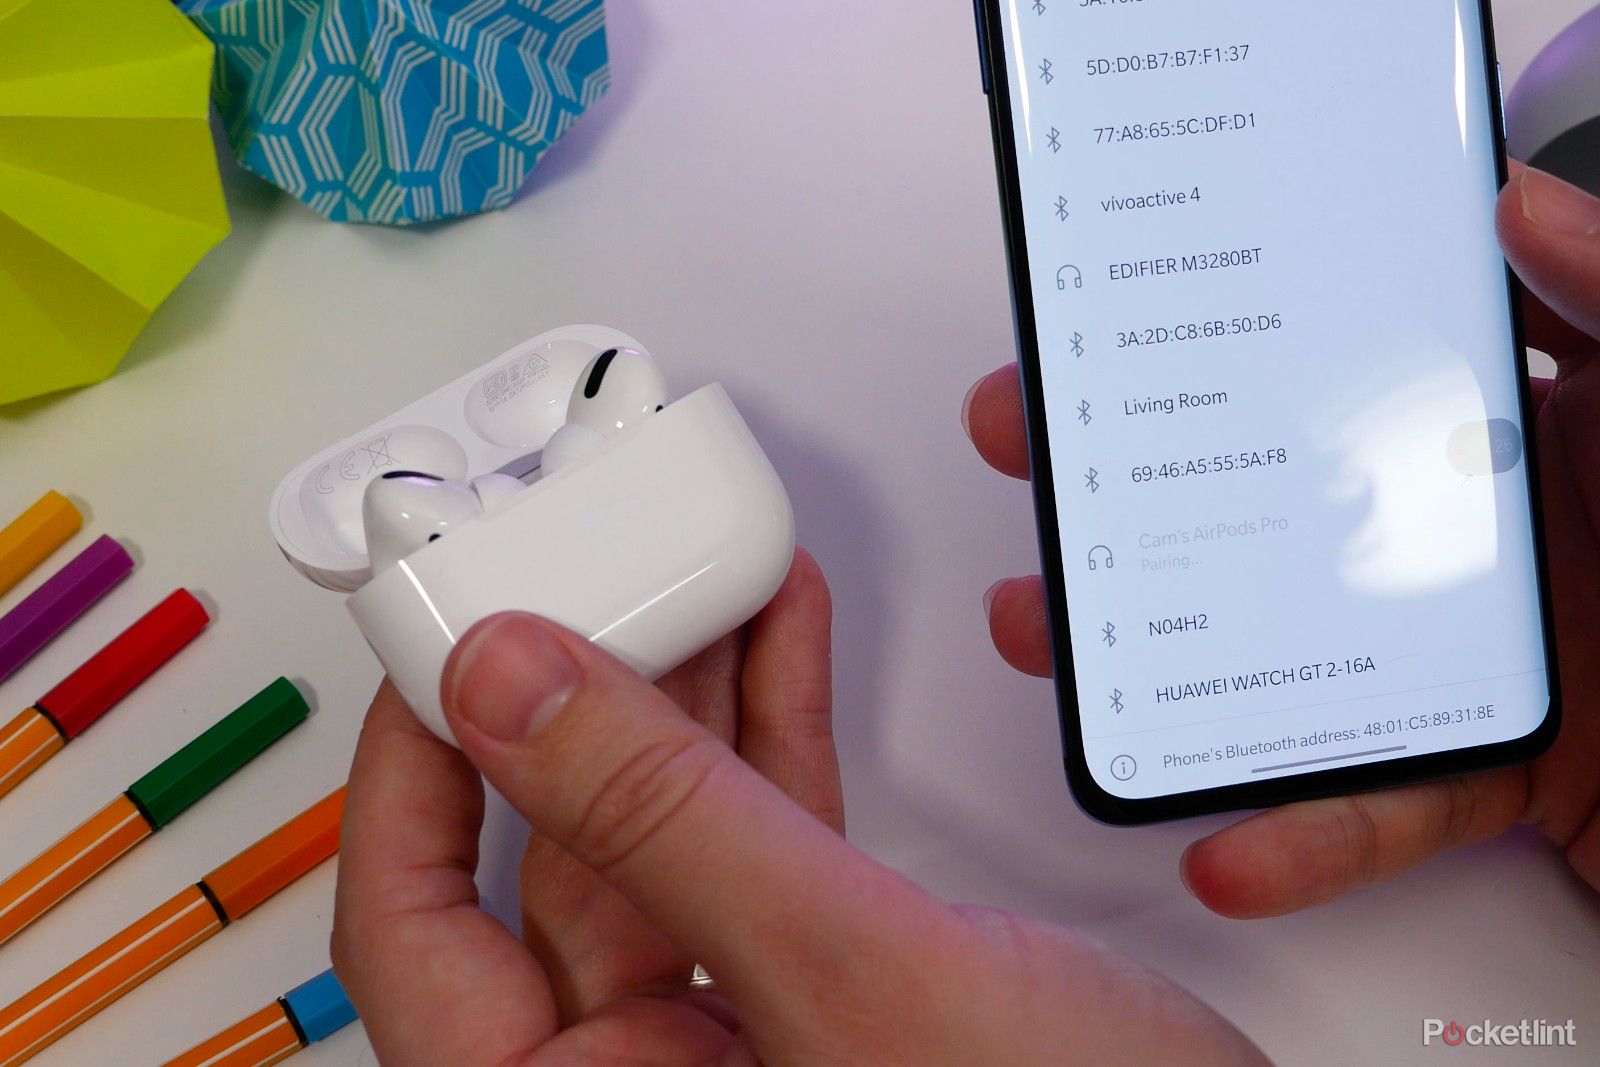 How to Apple AirPods with an Android phone